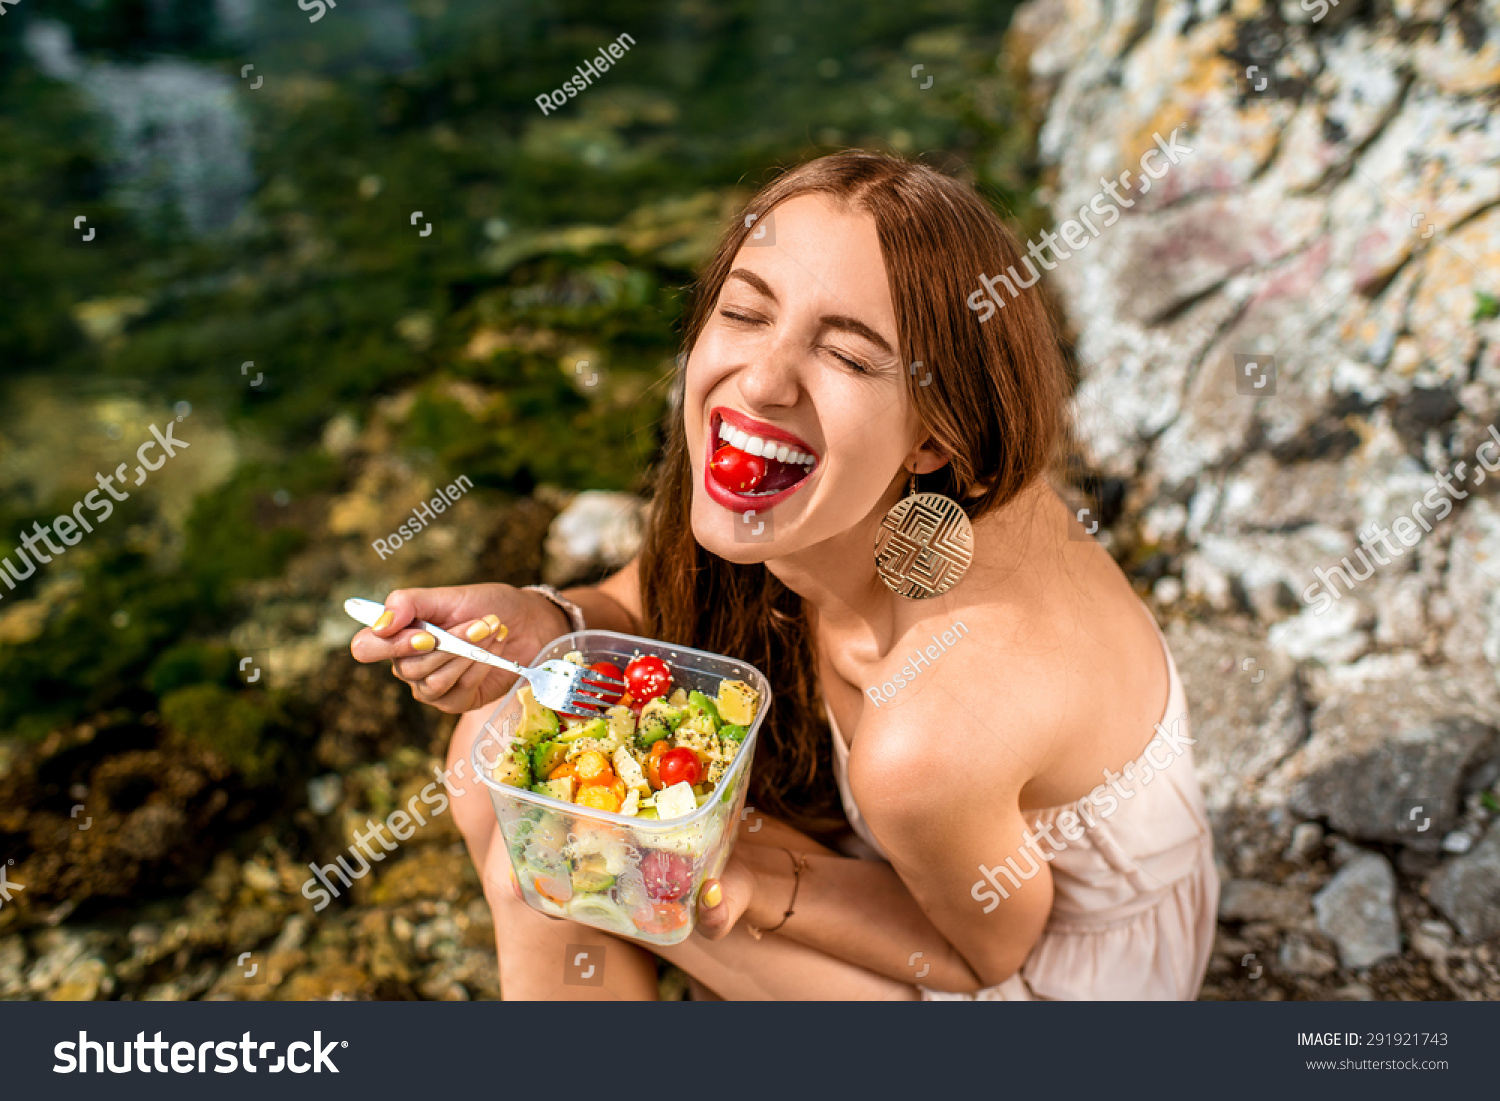 Woman eating healthy salad from plastic container near the river #291921743